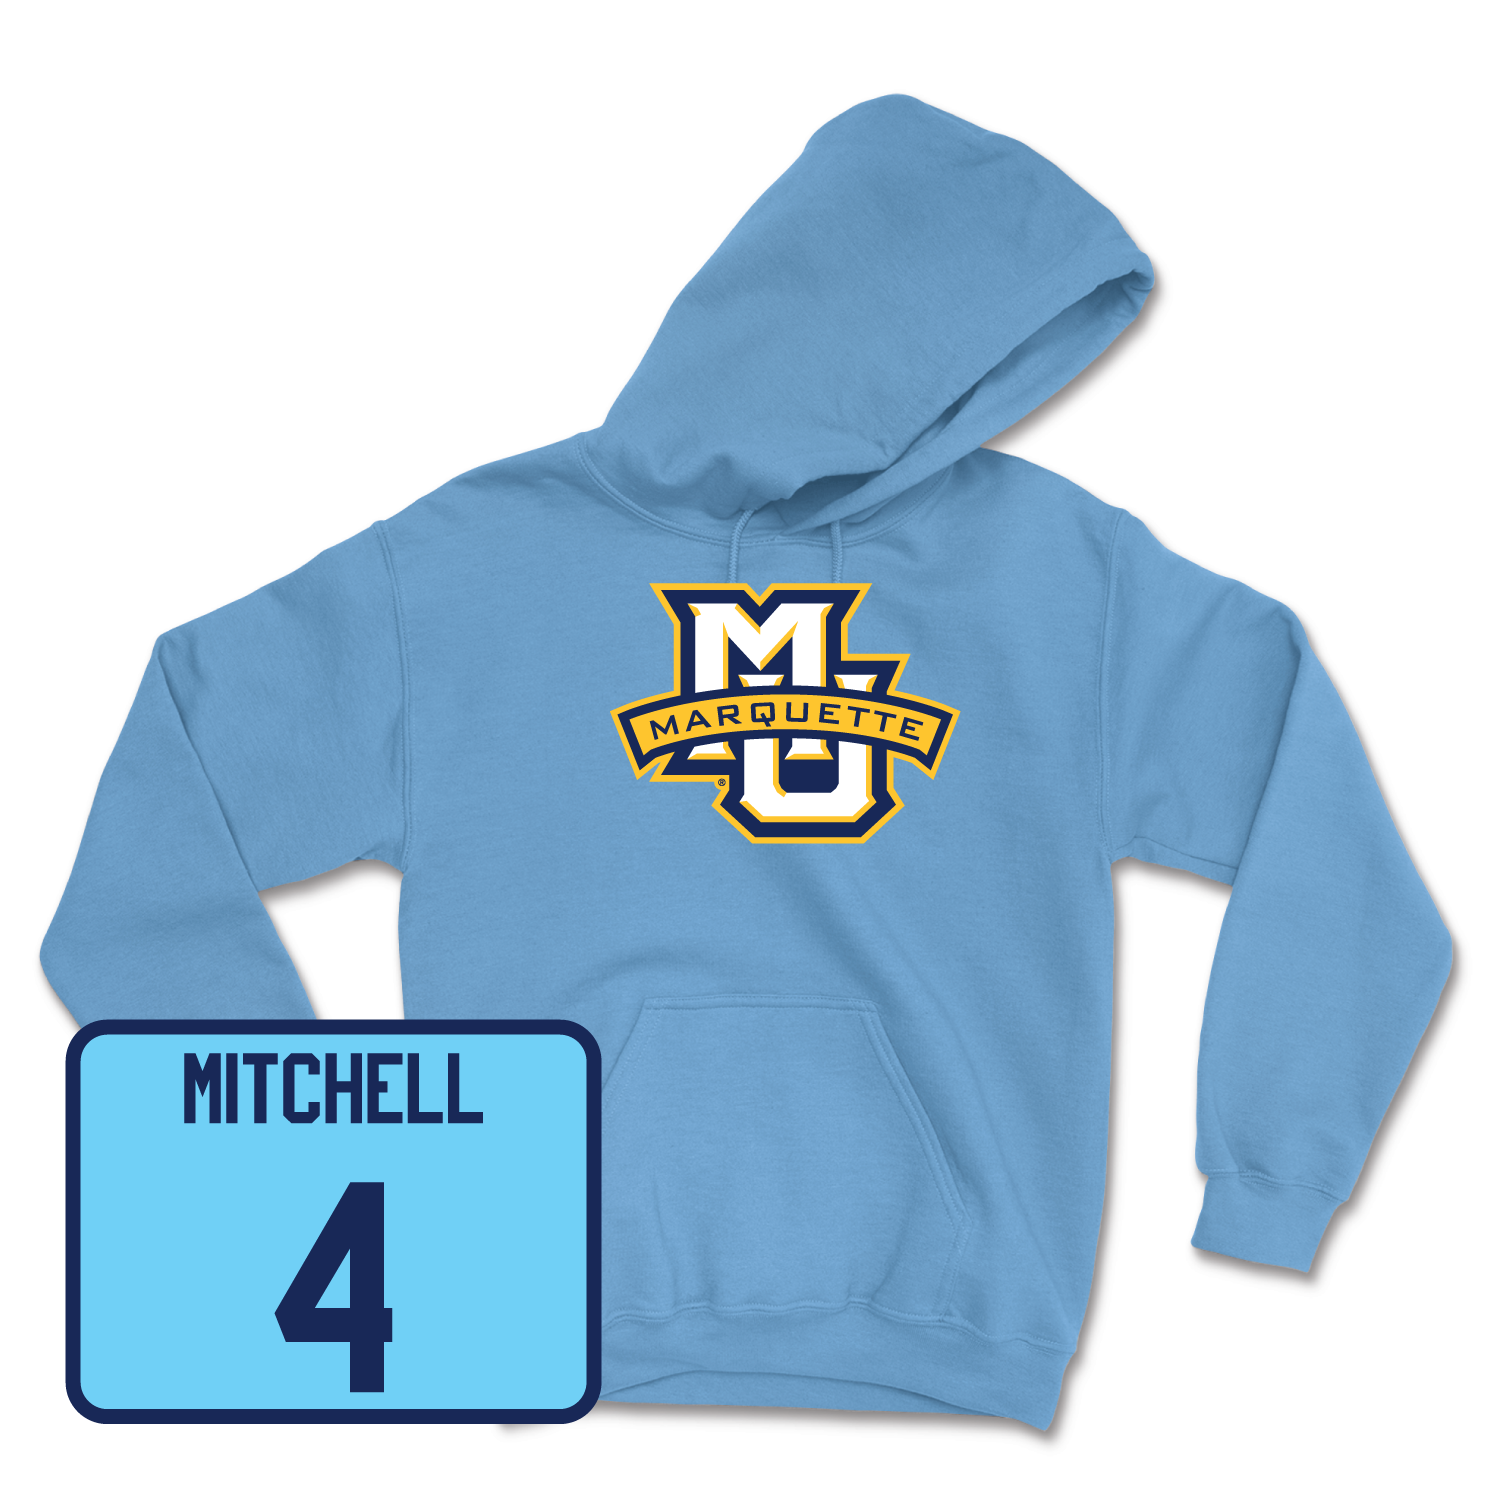 Championship Blue Men's Basketball Marquette Hoodie 2 Youth Small / Stevie Mitchell | #4